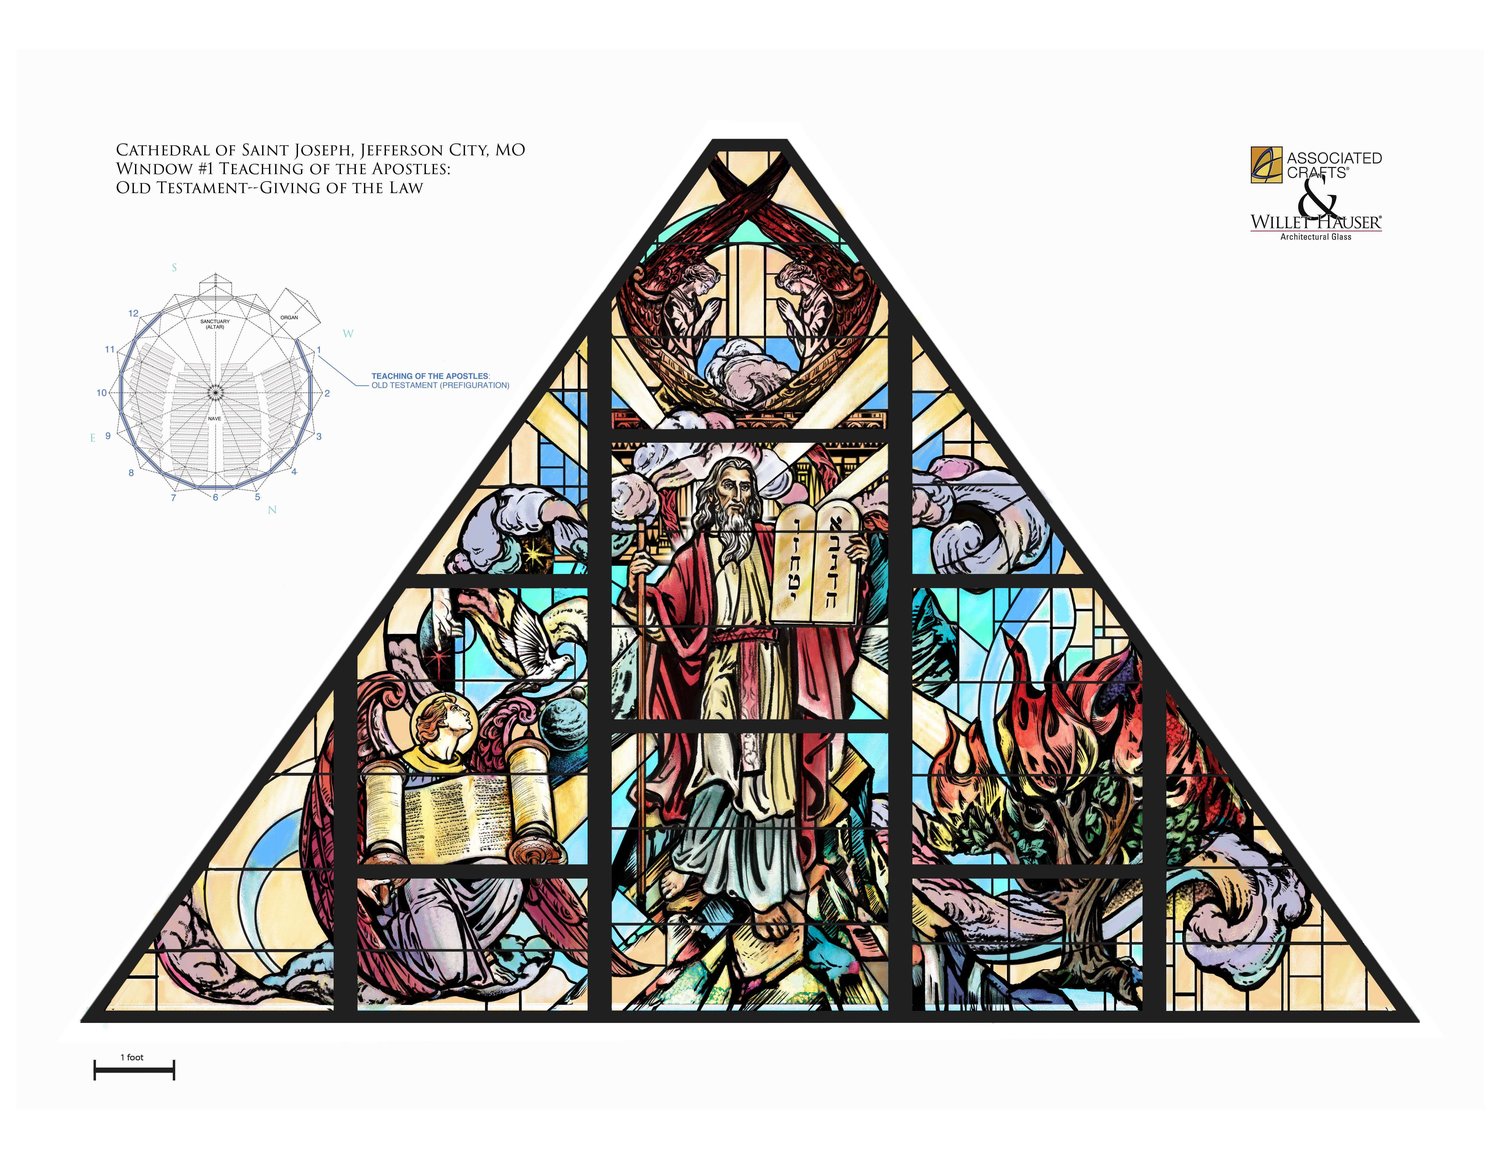 This is the final design from which artisans created the window depicting Moses presenting to the Israelites in the desert the Ten Commandments he had received from God on Mount Sinai.